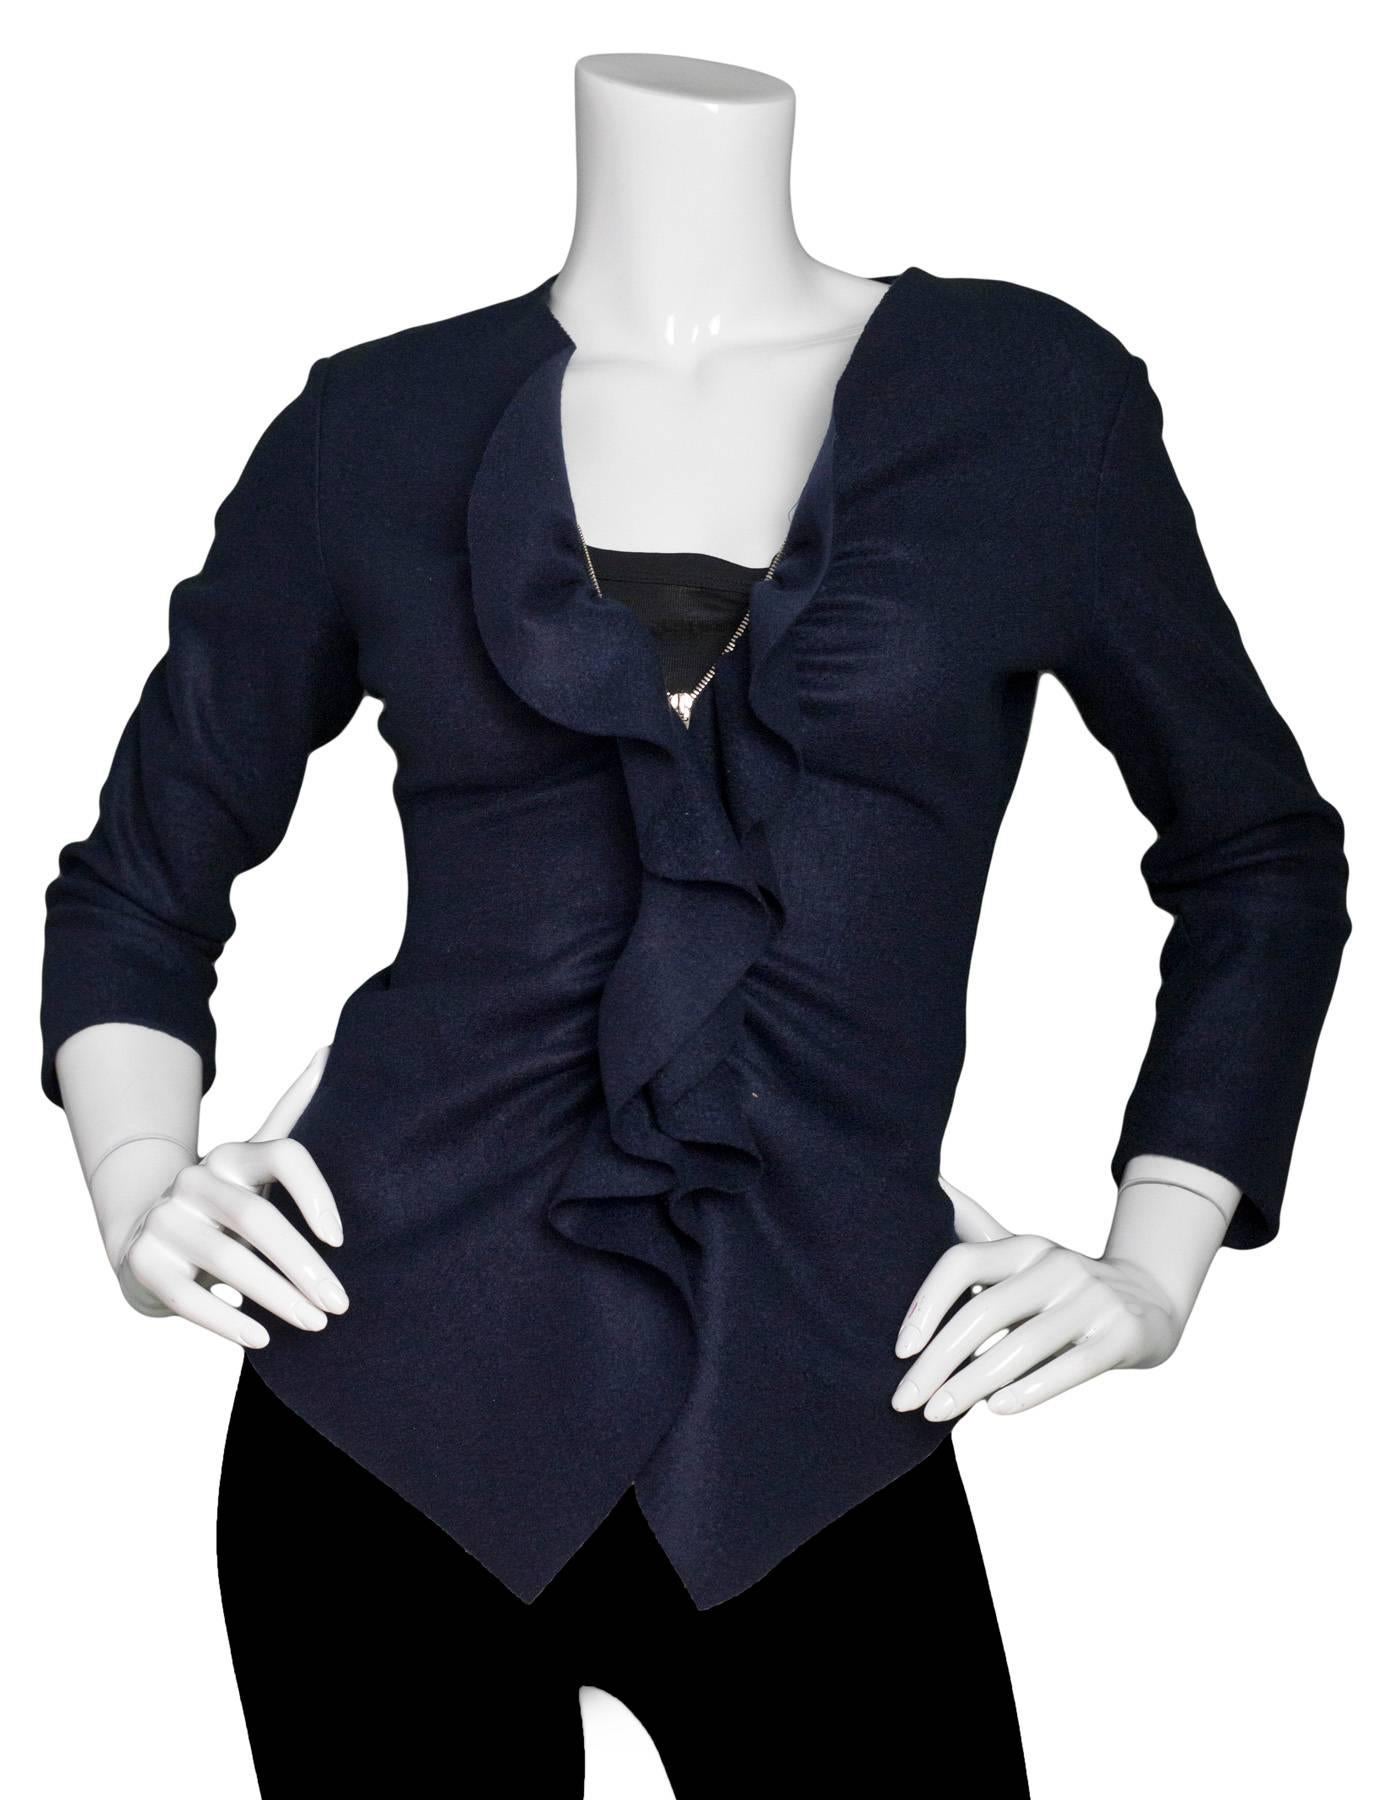 CH Carolina Herrera Navy Wool Ruffle Jacket Sz 2

Color: Navy
Composition: 100% Wool
Lining: None
Closure/Opening: Front double zip closure
Exterior Pockets: None
Interior Pockets: None
Overall Condition: Excellent pre-owned condition
Marked Size: